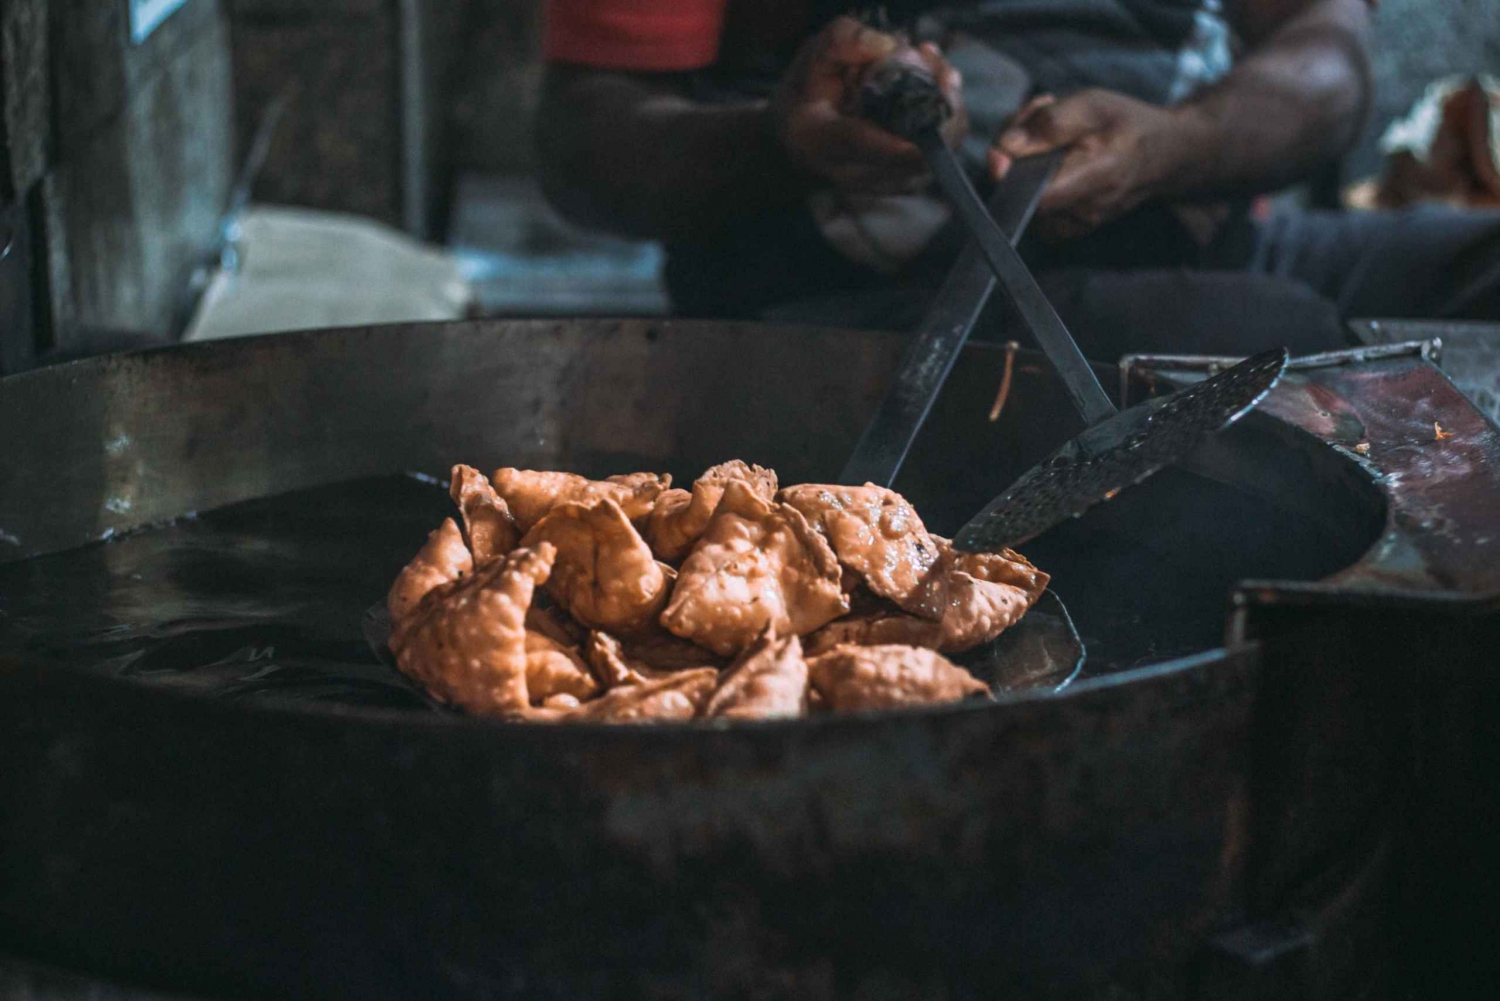 Eat Like a Local: Chandni Chowk Street Food and Walking Tour